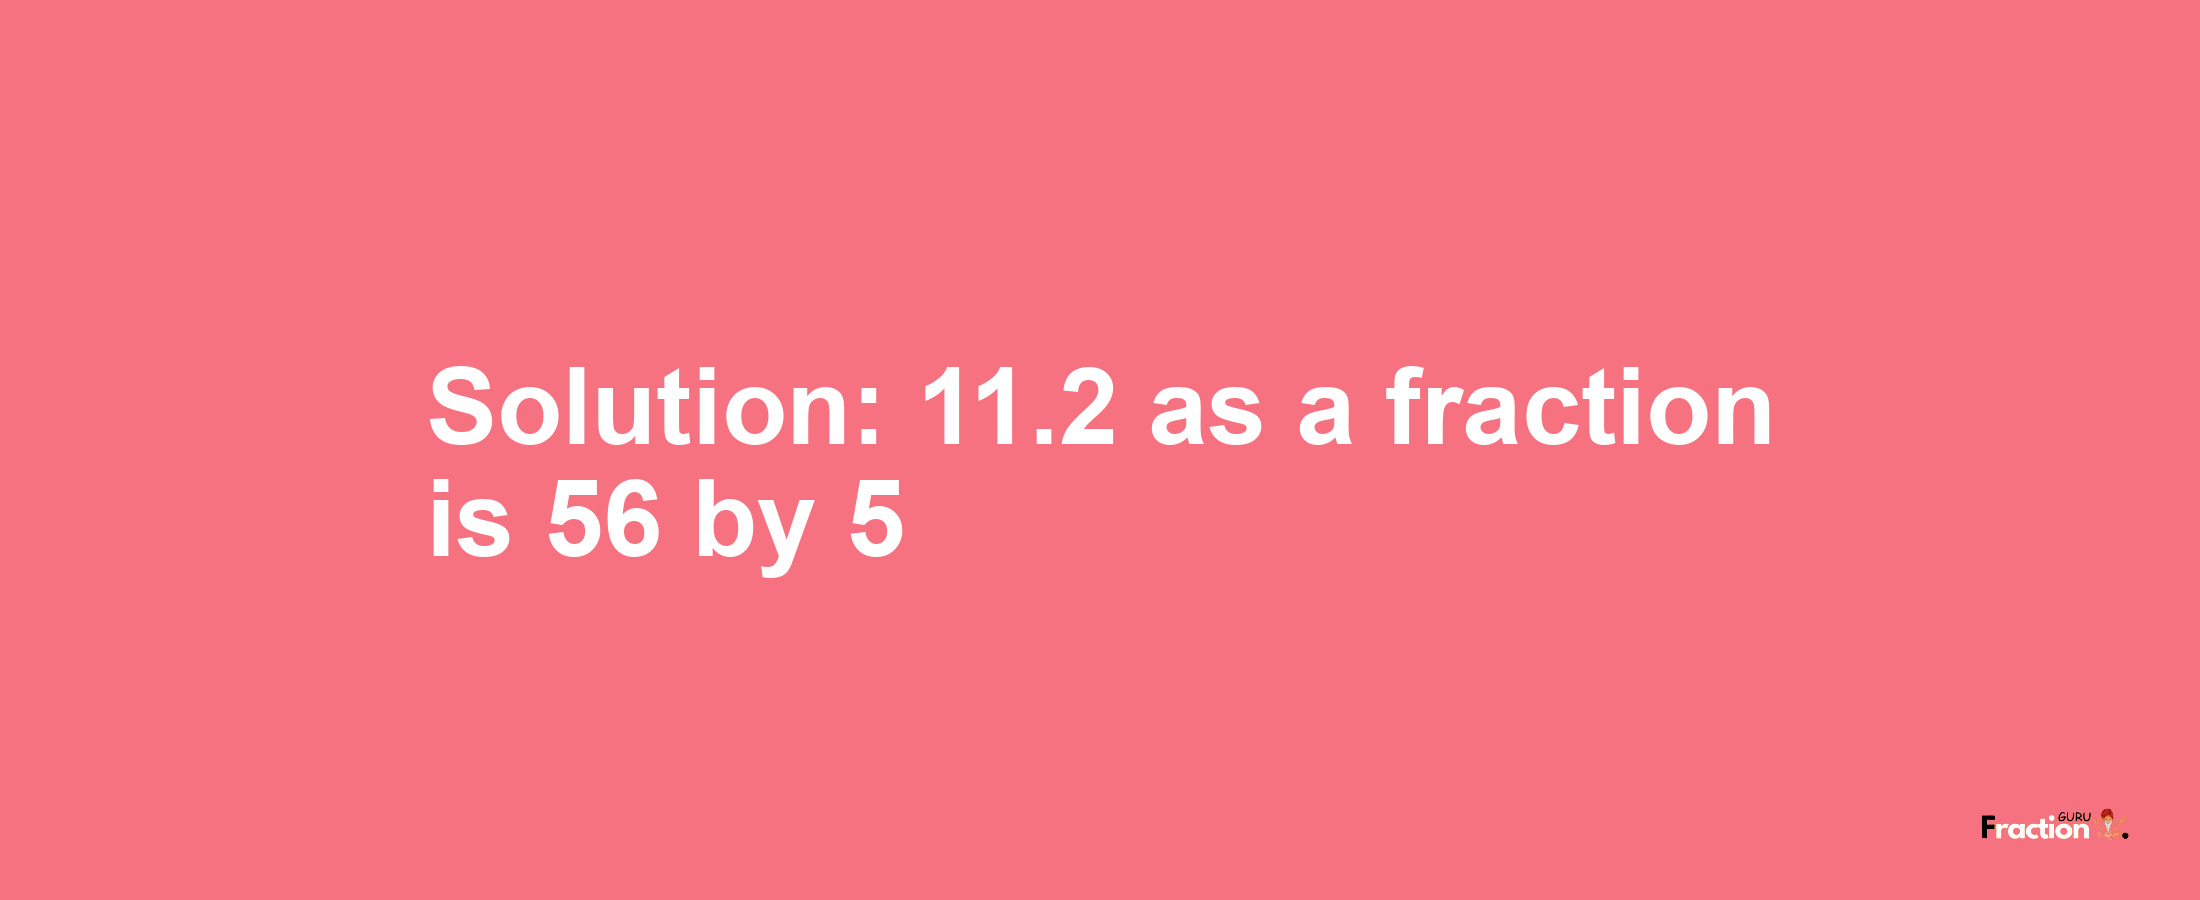 Solution:11.2 as a fraction is 56/5